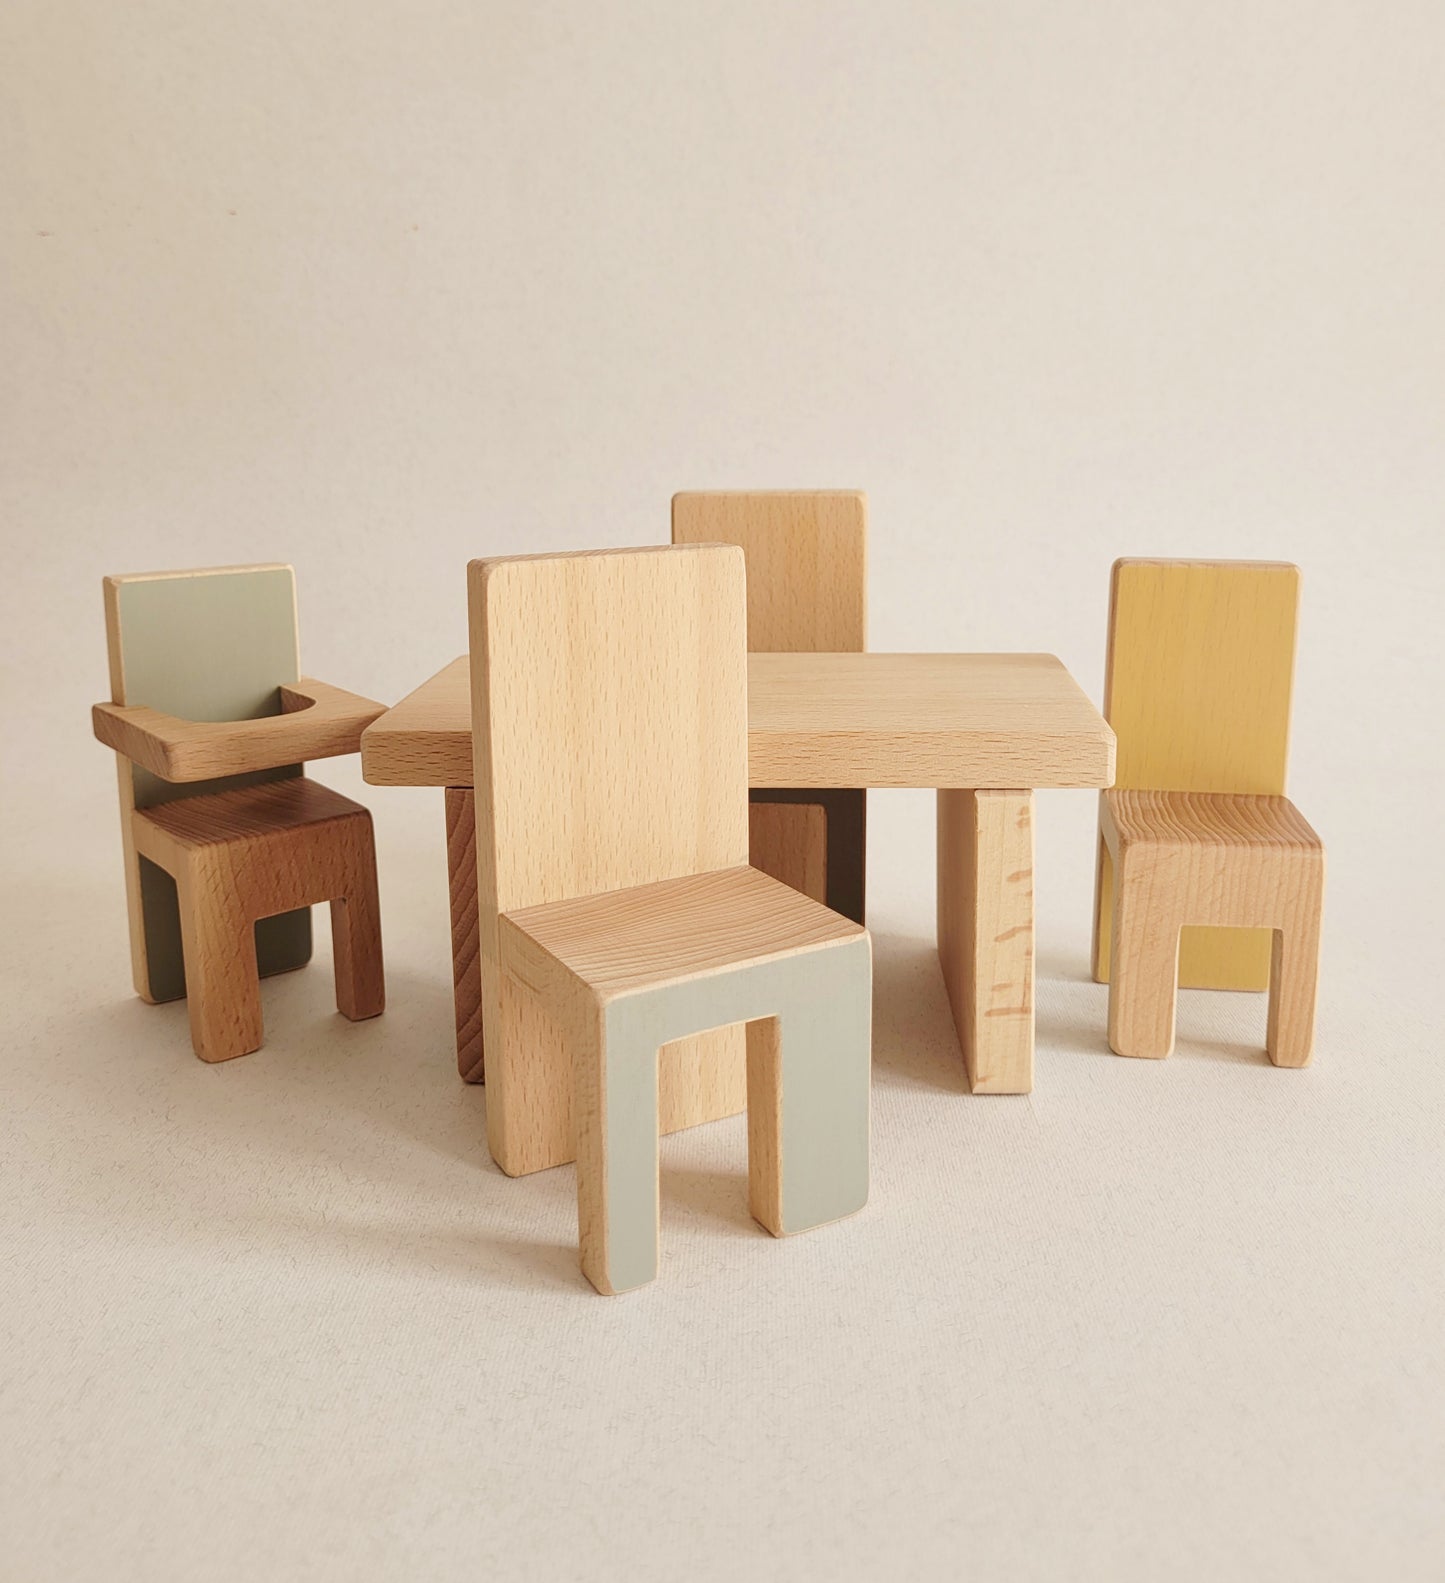 At the table play set - Exclusive collaboration for A Greener Wood